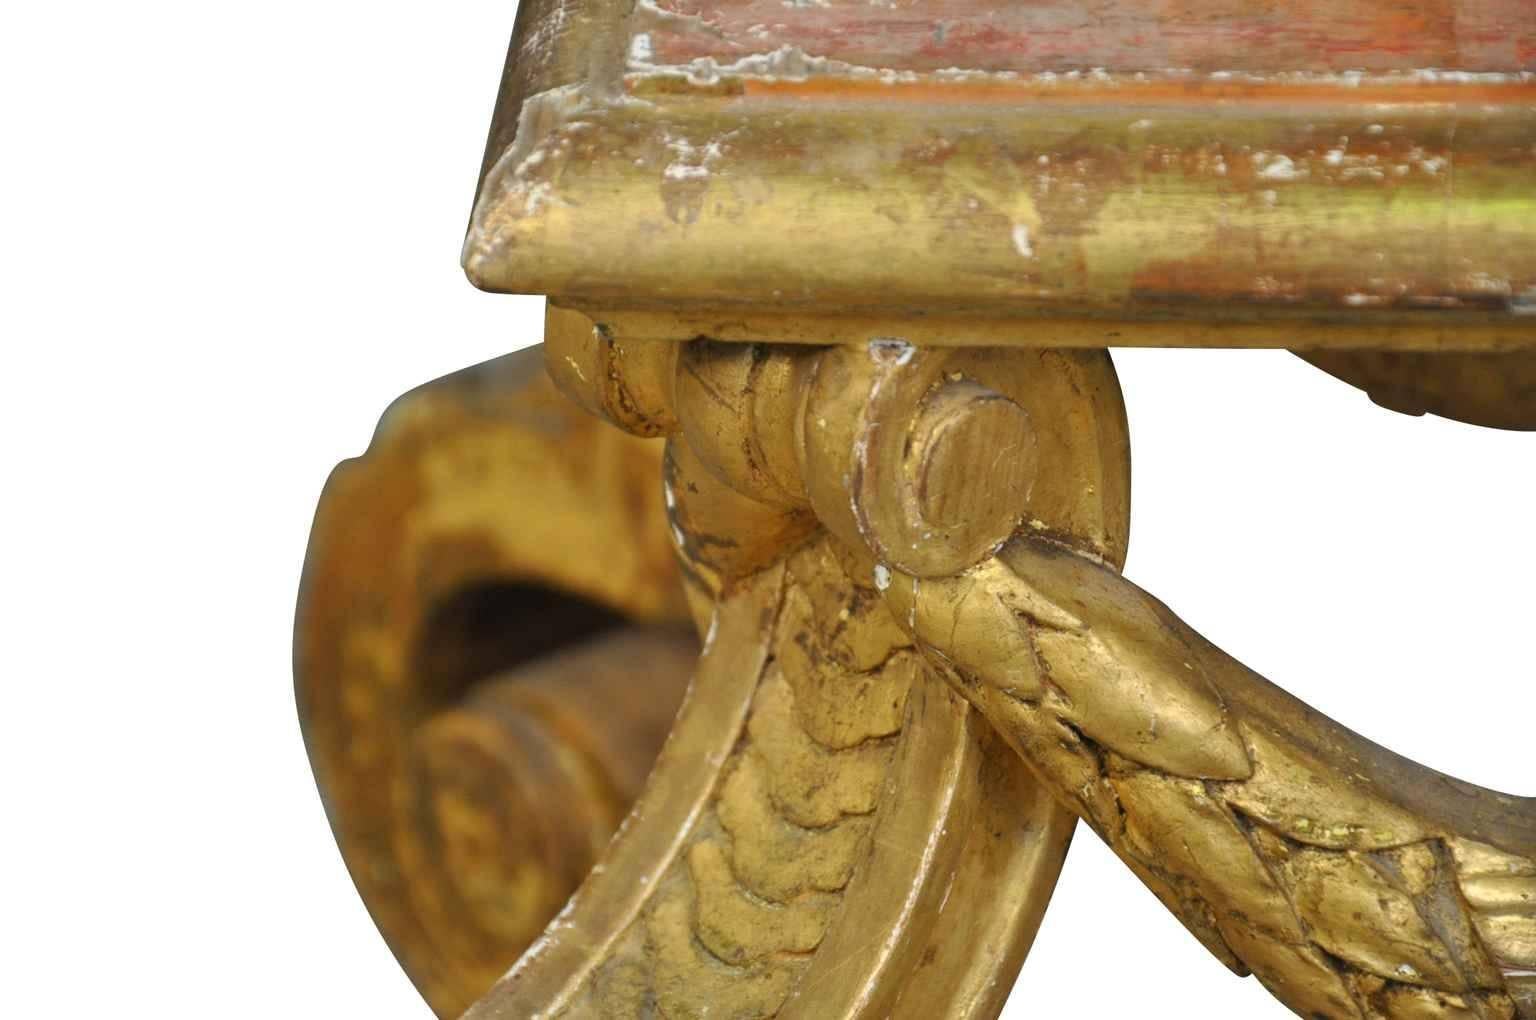 European French, 18th Century Giltwood Stand, Pedestal